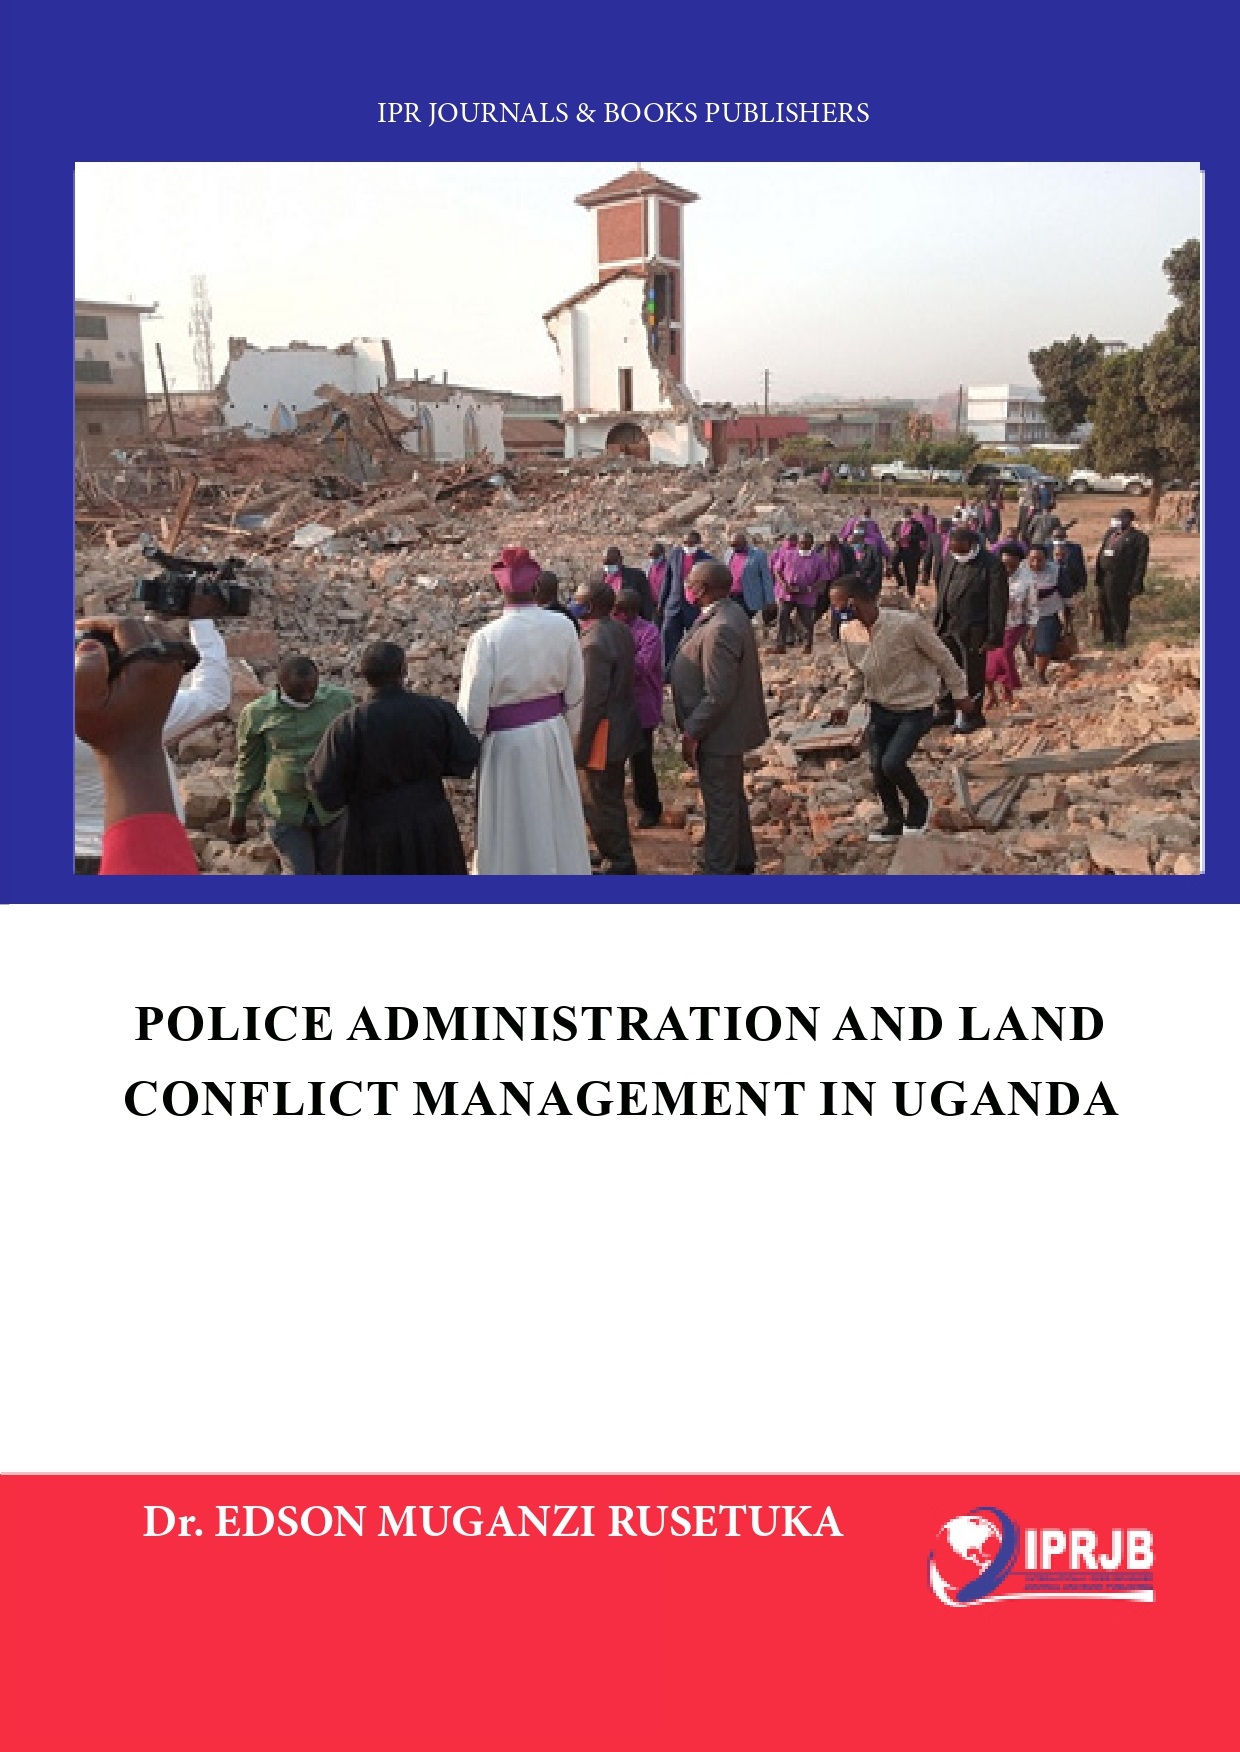 Police Administration and Land Conflict Management in Uganda